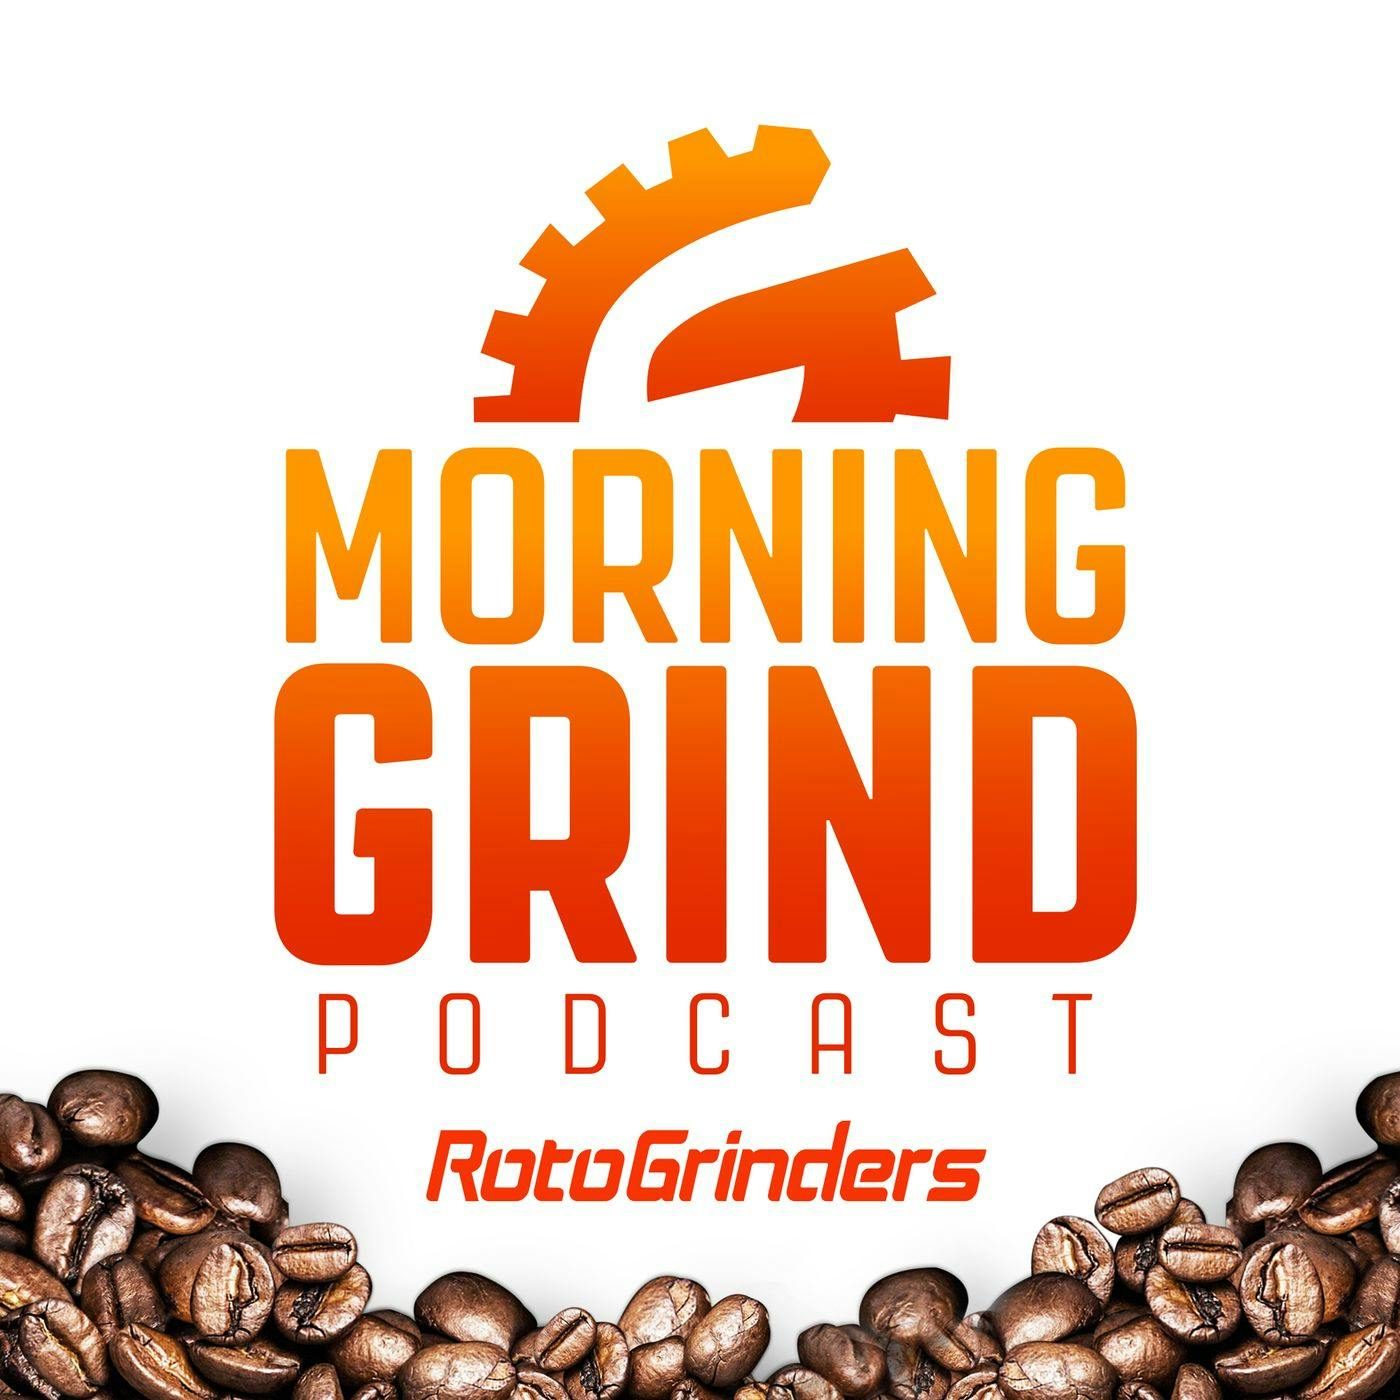 NBA Morning Grind: 3/12/2021 - Let's Keep Playing Butler